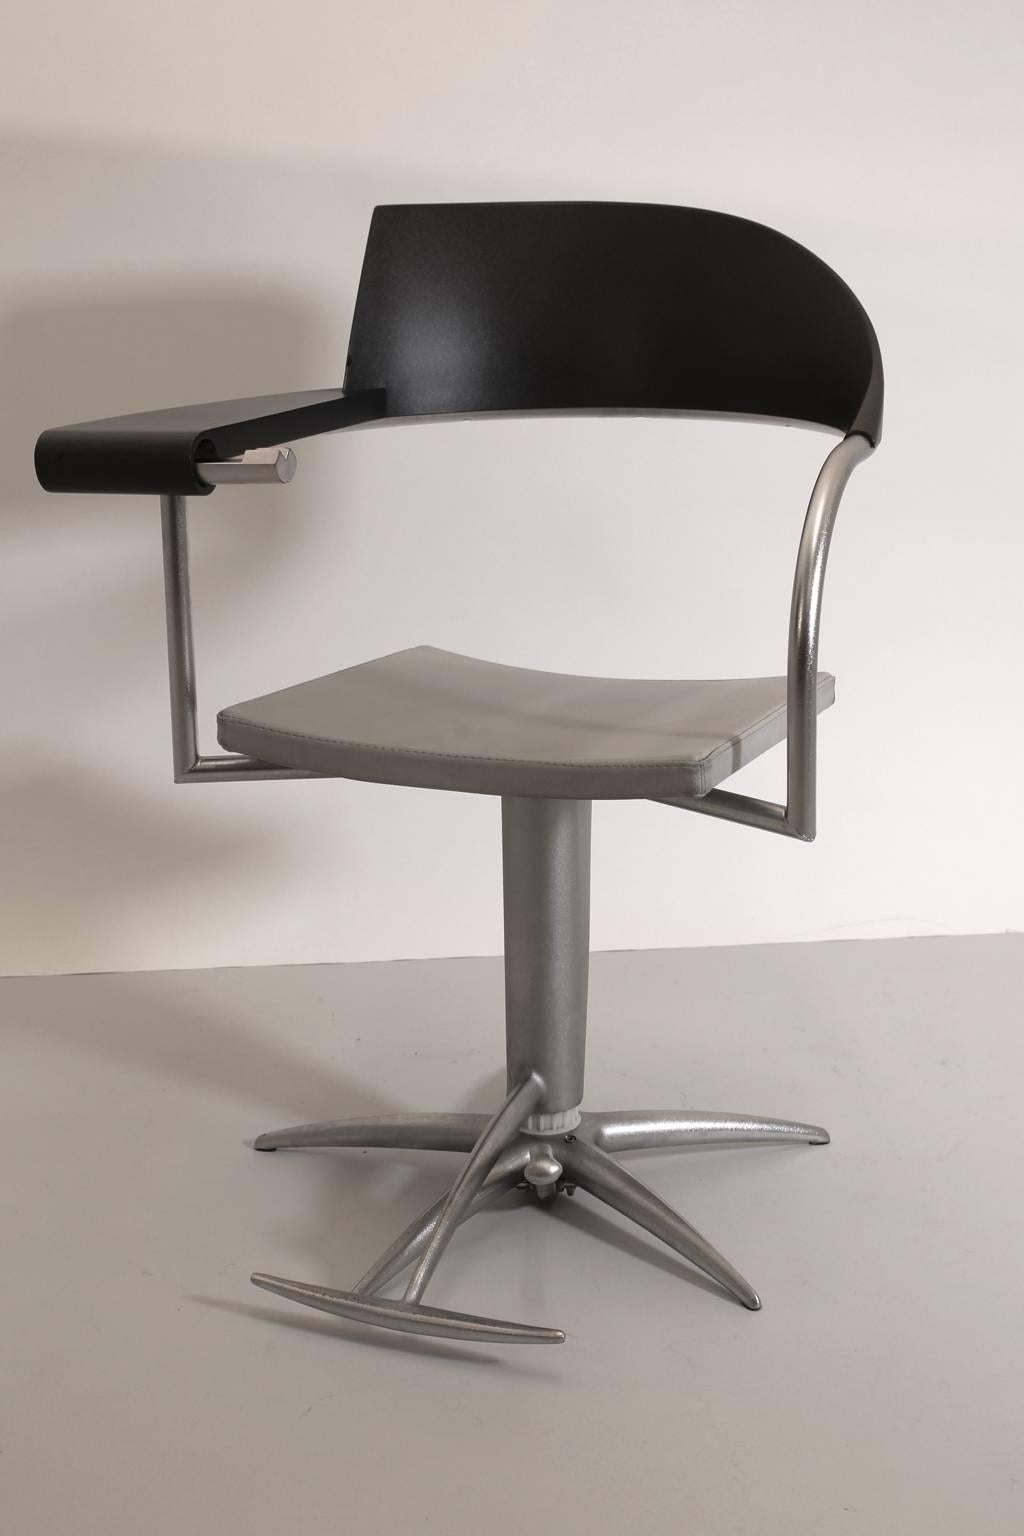 French Postmodern Vintage Swivel Plastic Armchair Black Silver Philippe Starck, 1980s For Sale